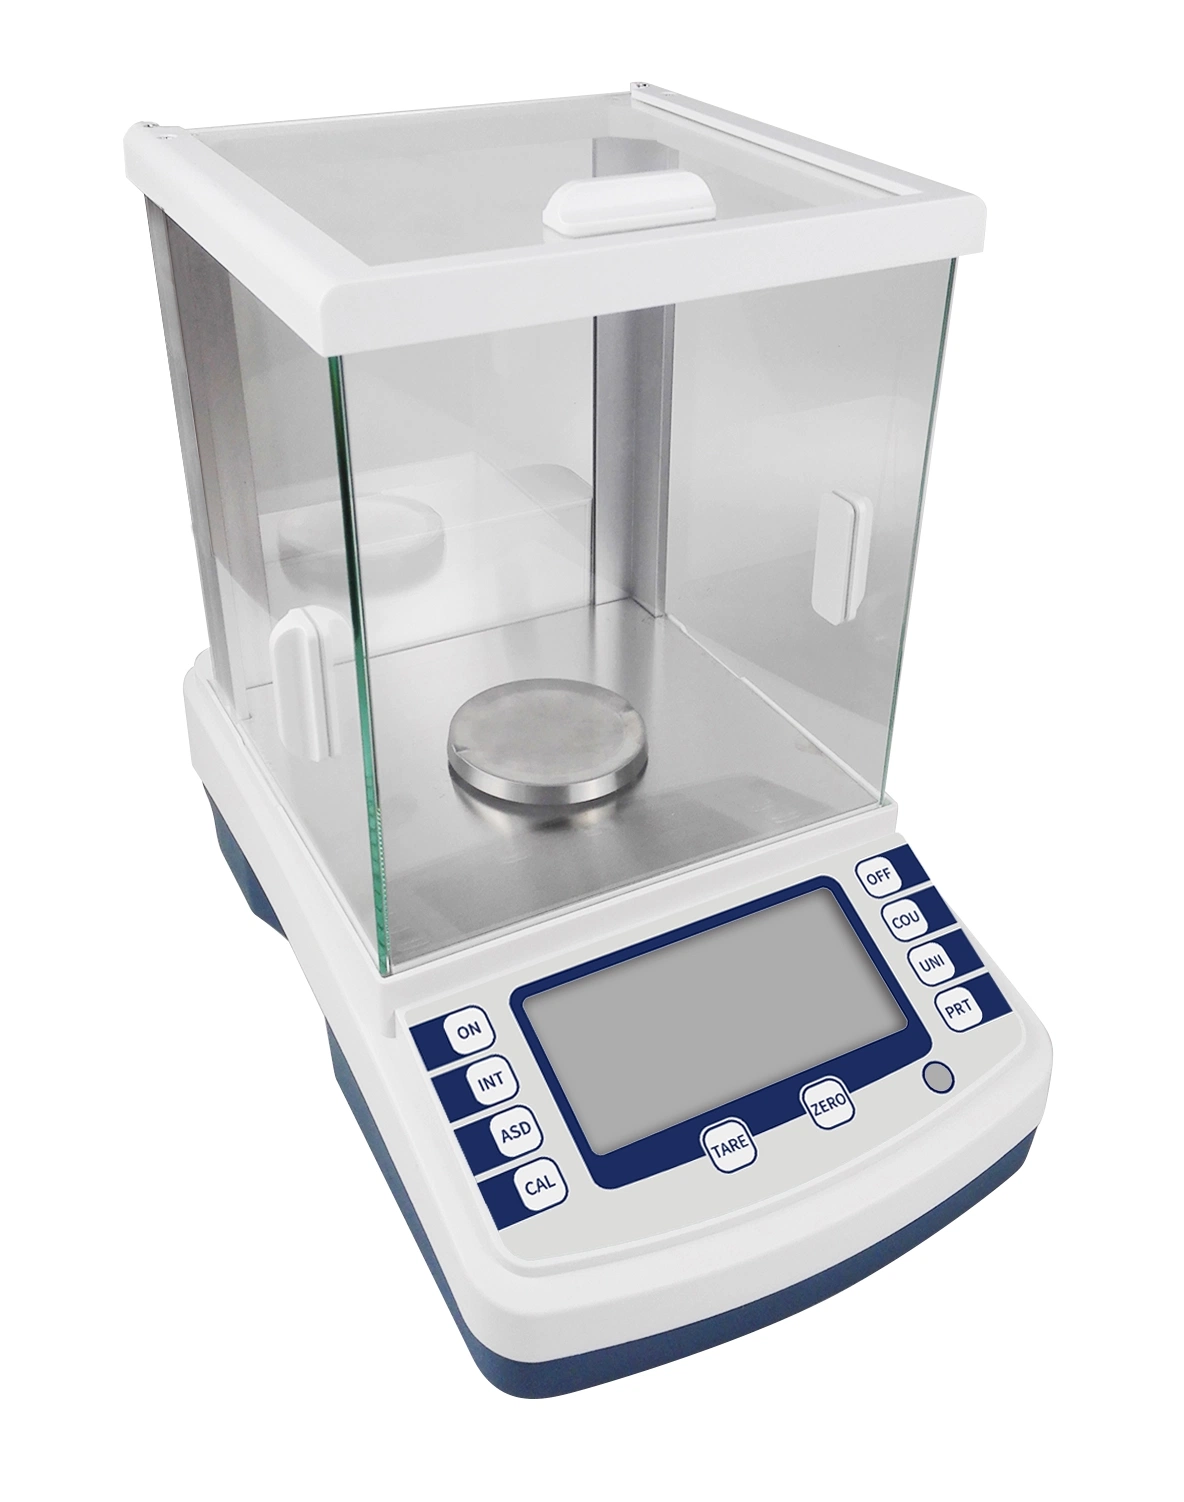 Precision Lab Analytical Balance Electronic Weighing Scale Ja5003n 500g 1mg